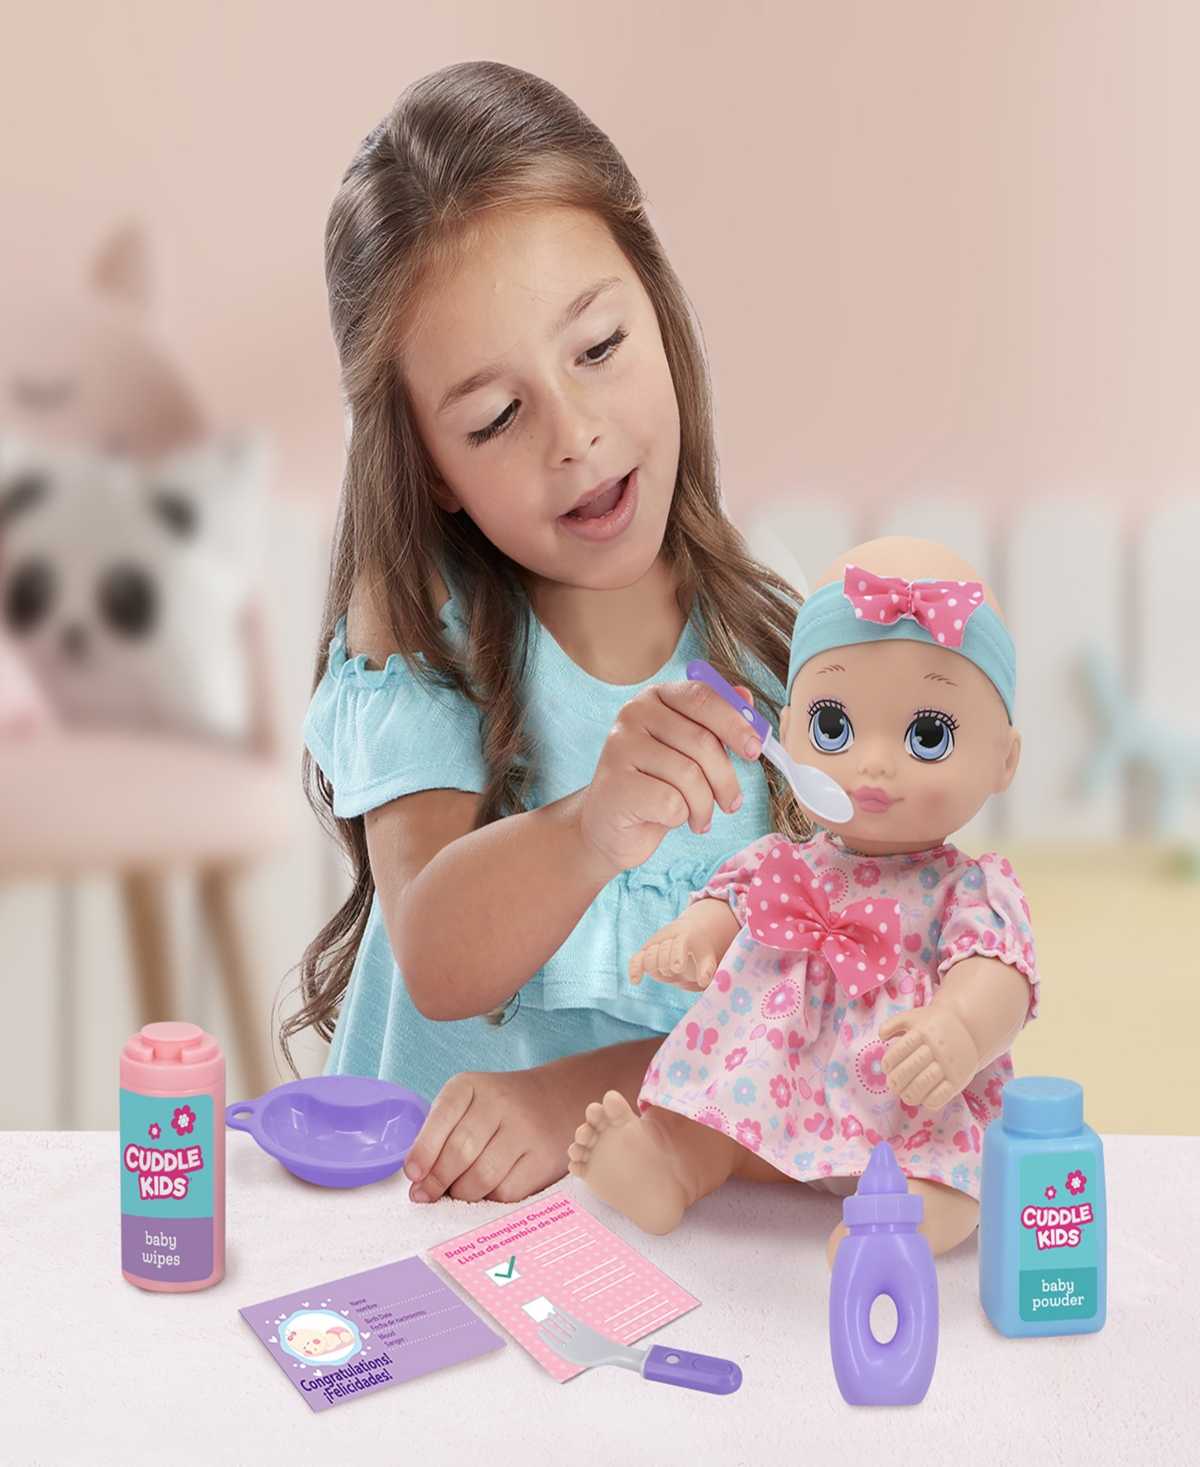 Shop Cuddle Play All Day 17 Piece 10" Baby Doll Playset New Adventures, Children's Pretend Play Set In Multi